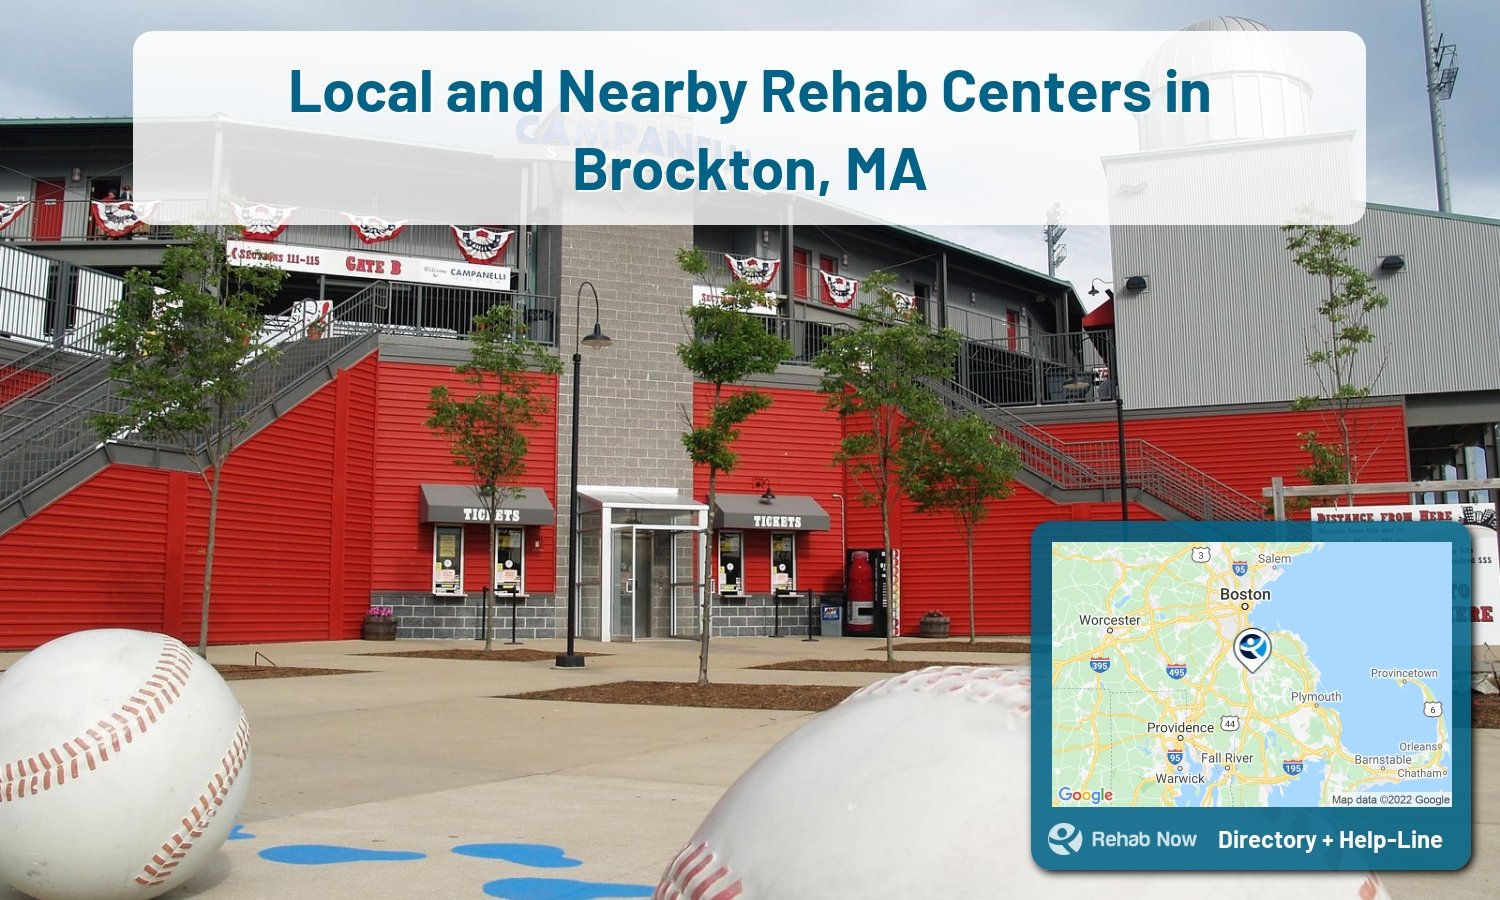 Brockton, MA Treatment Centers. Find drug rehab in Brockton, Massachusetts, or detox and treatment programs. Get the right help now!